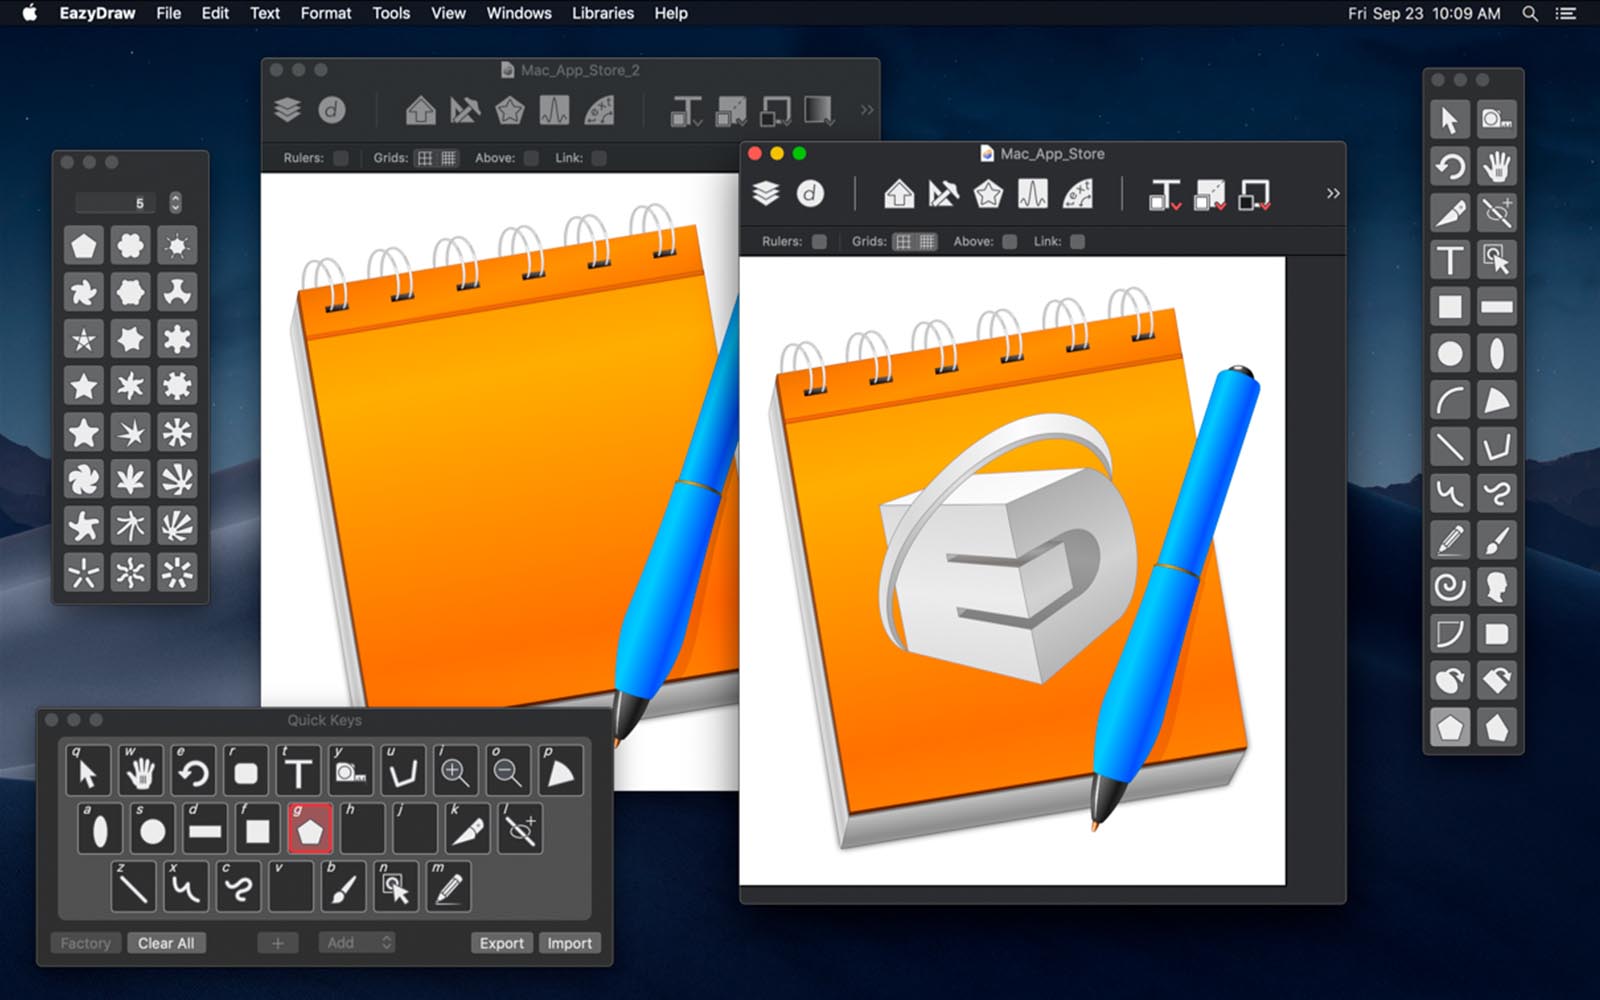 eazydraw for mac free download